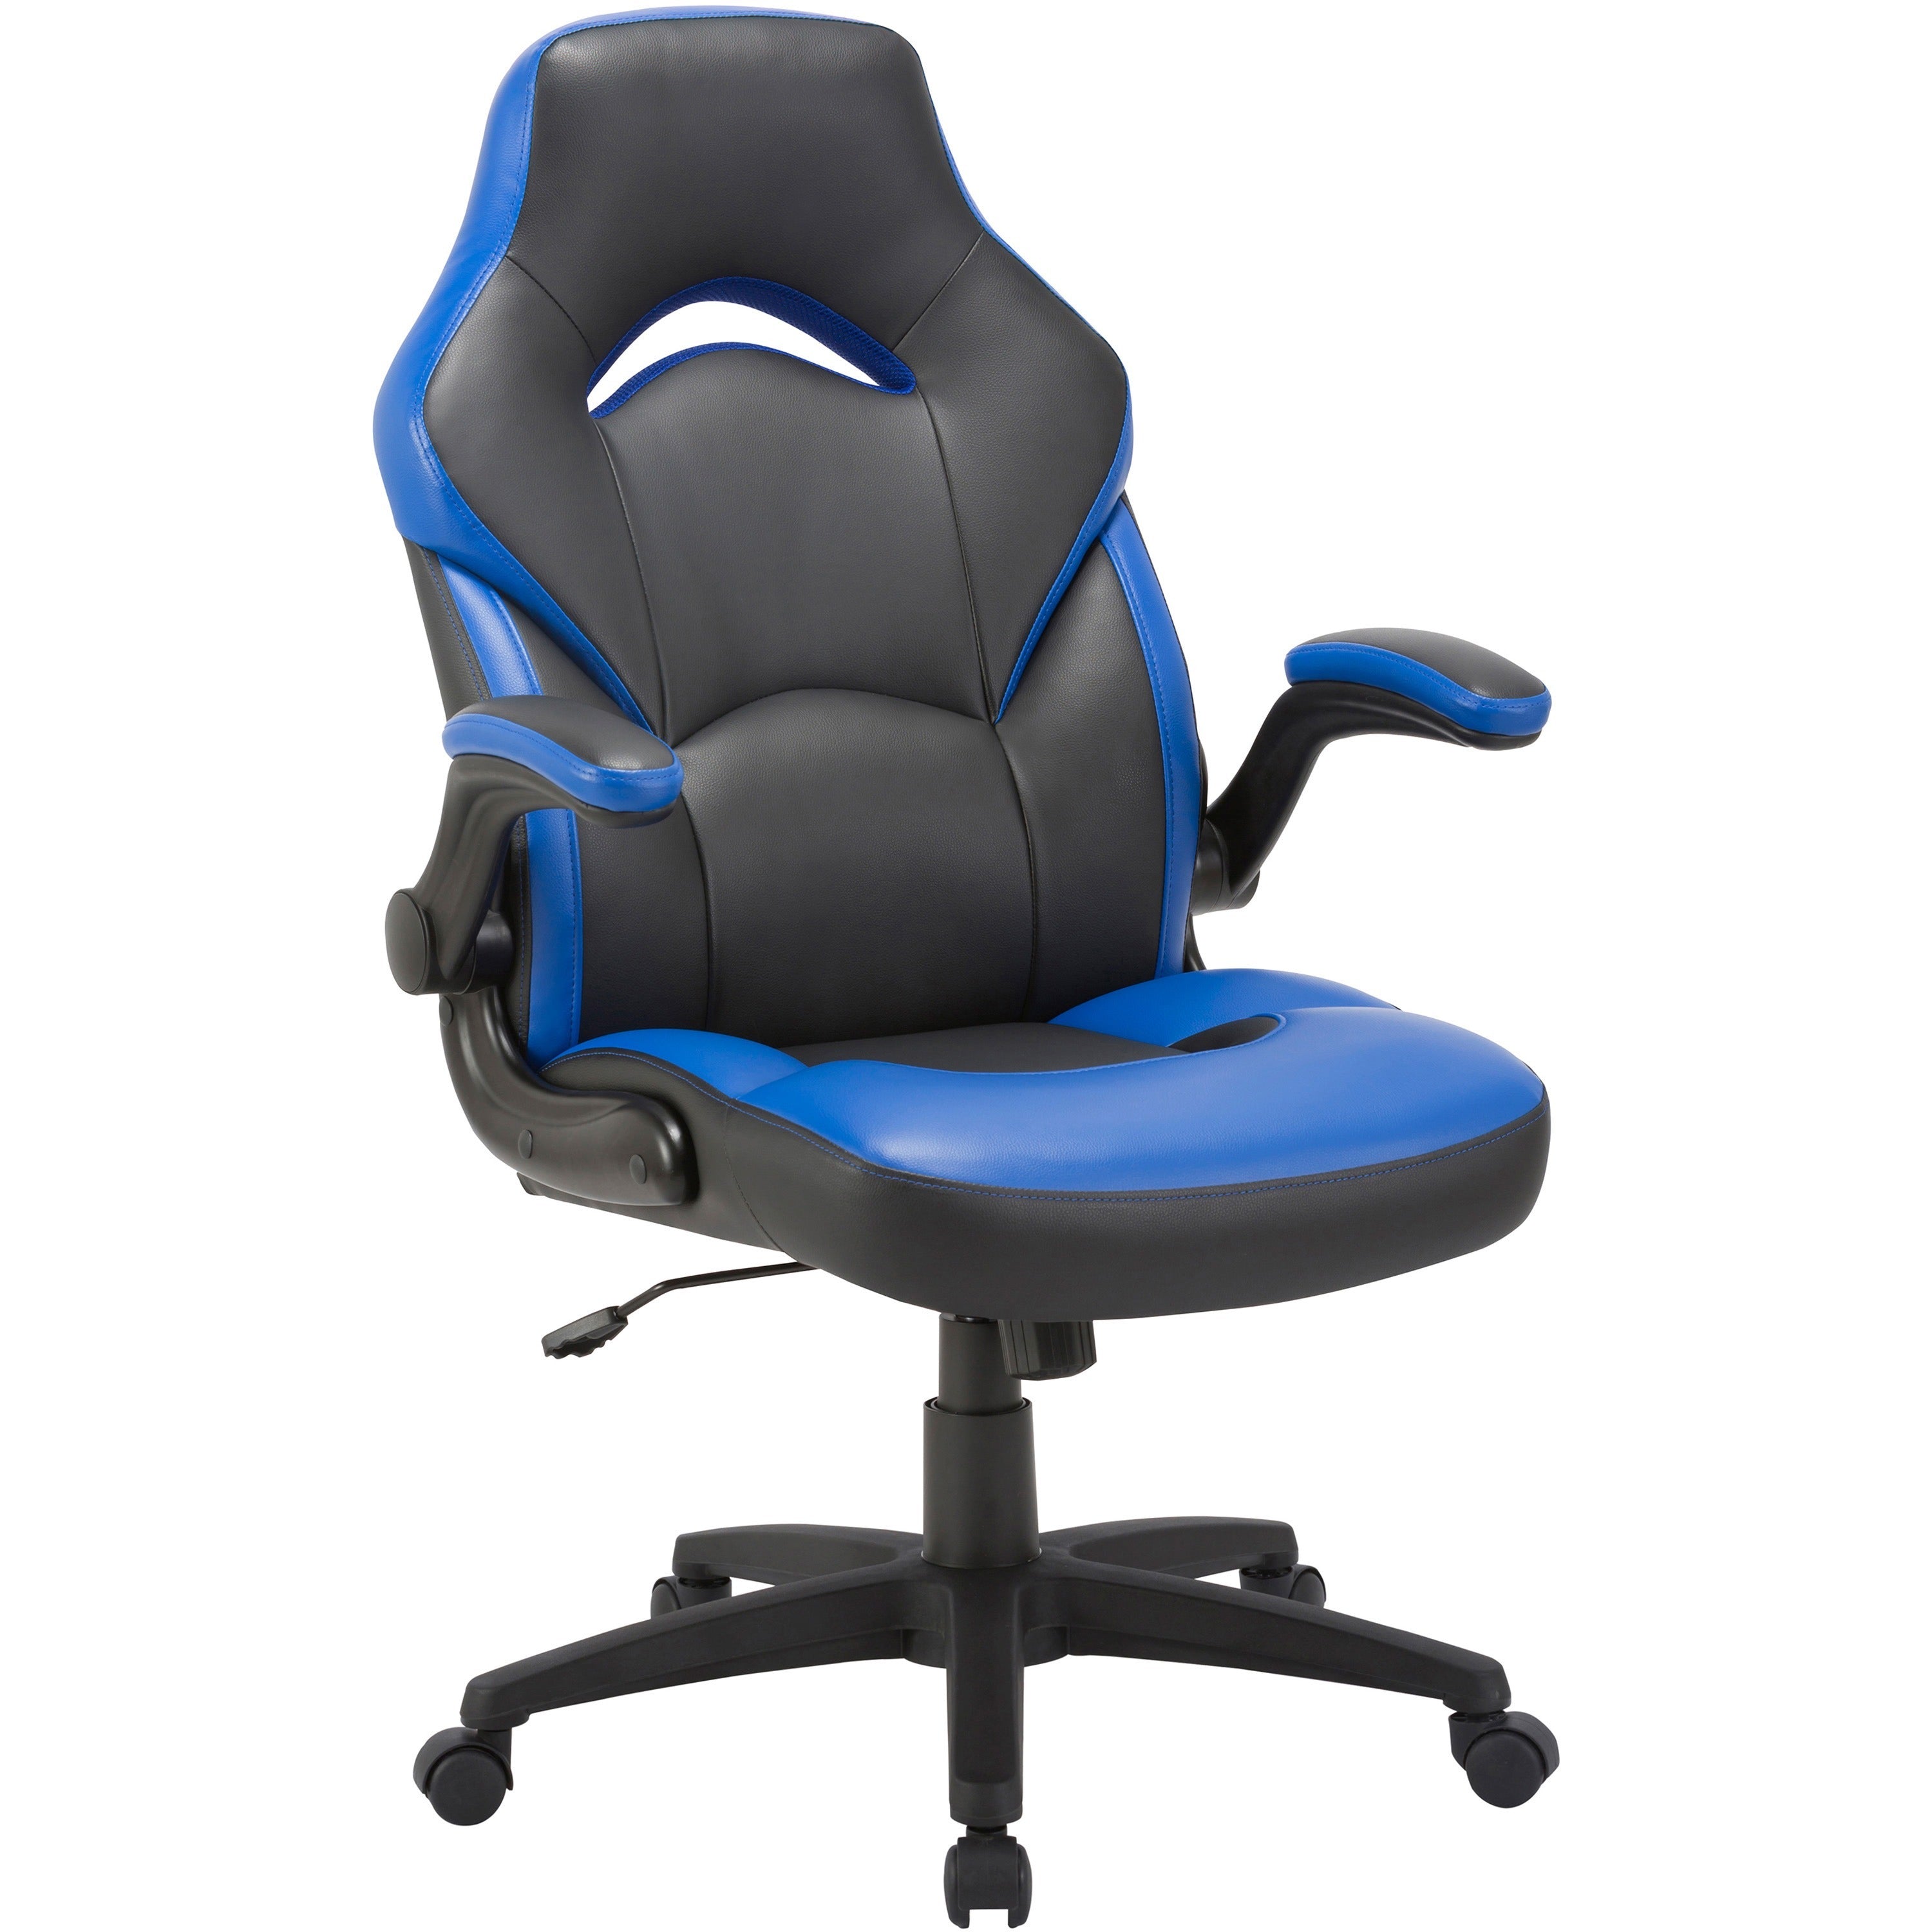 lys-high-back-gaming-chair-for-gaming-blue-black_lysch701pabe - 1